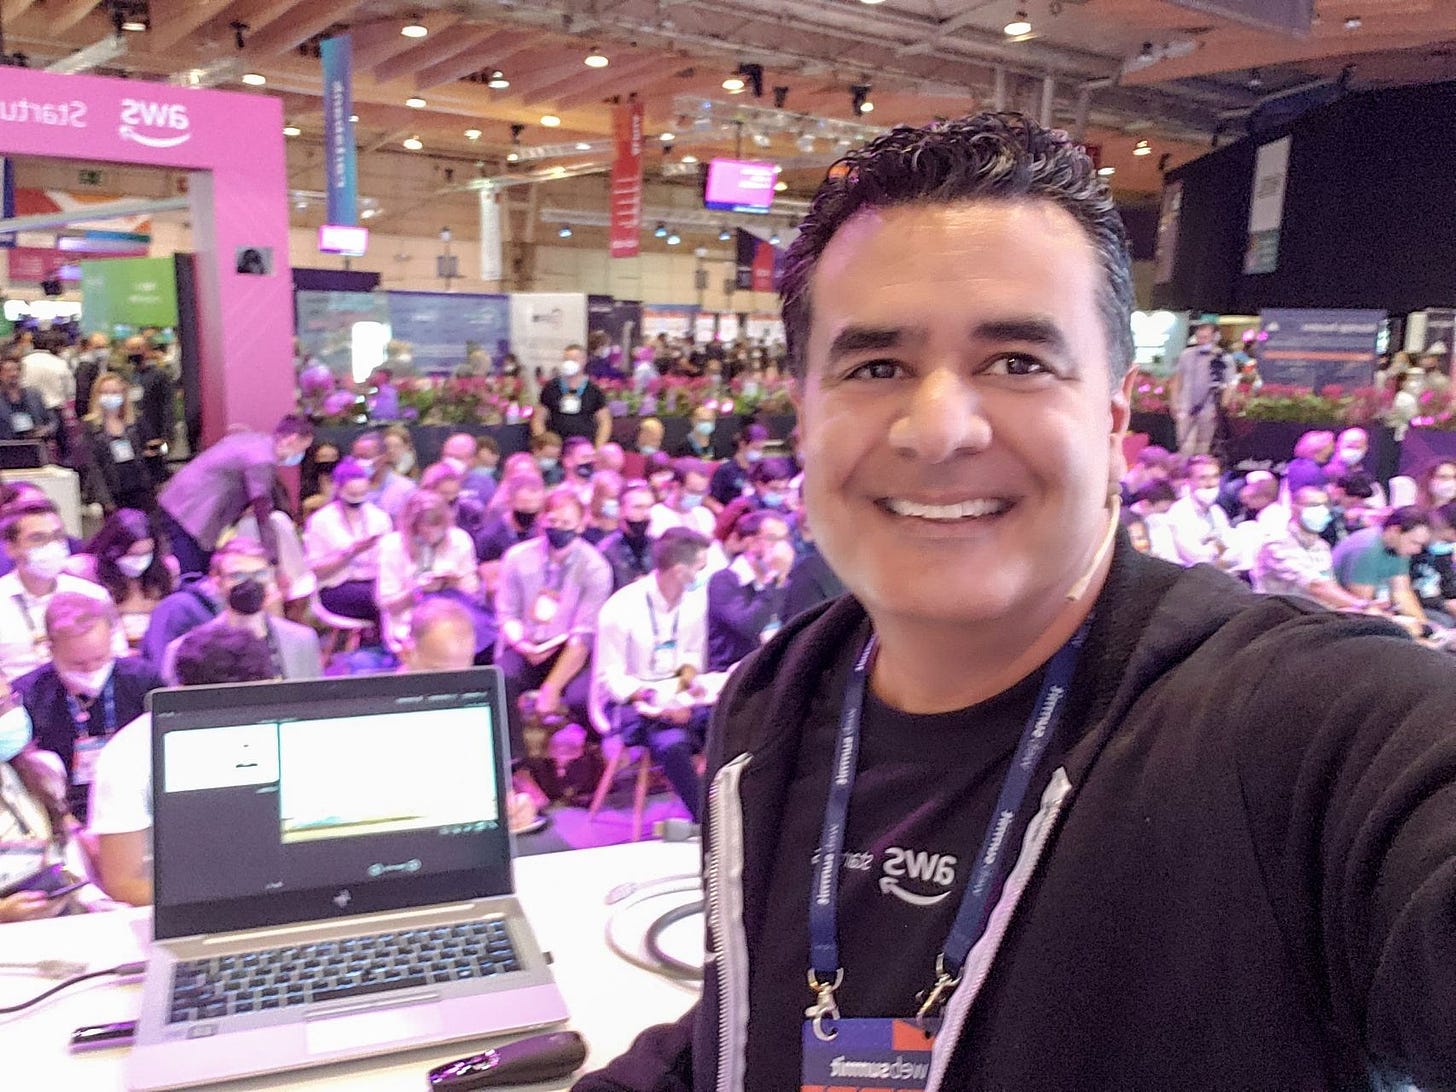 Enjoy my time at Web Summit on the speaker’s stage once again!